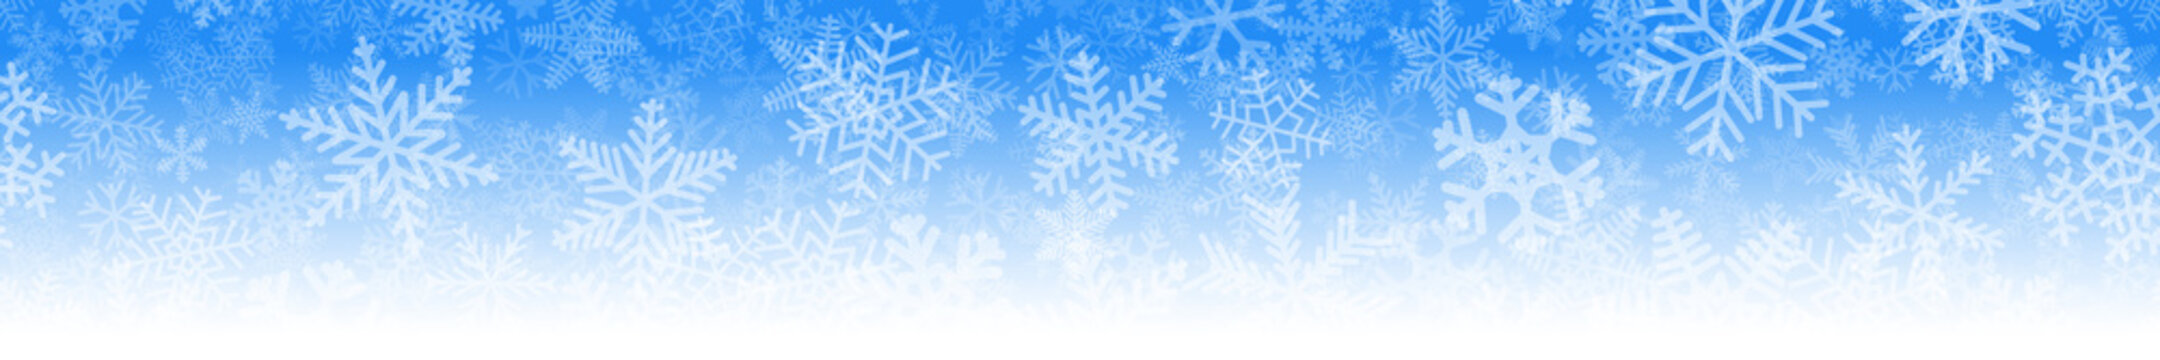 Christmas horizontal seamless banner of many layers of snowflakes of different shapes, sizes and transparency. On gradient background from light blue to white.